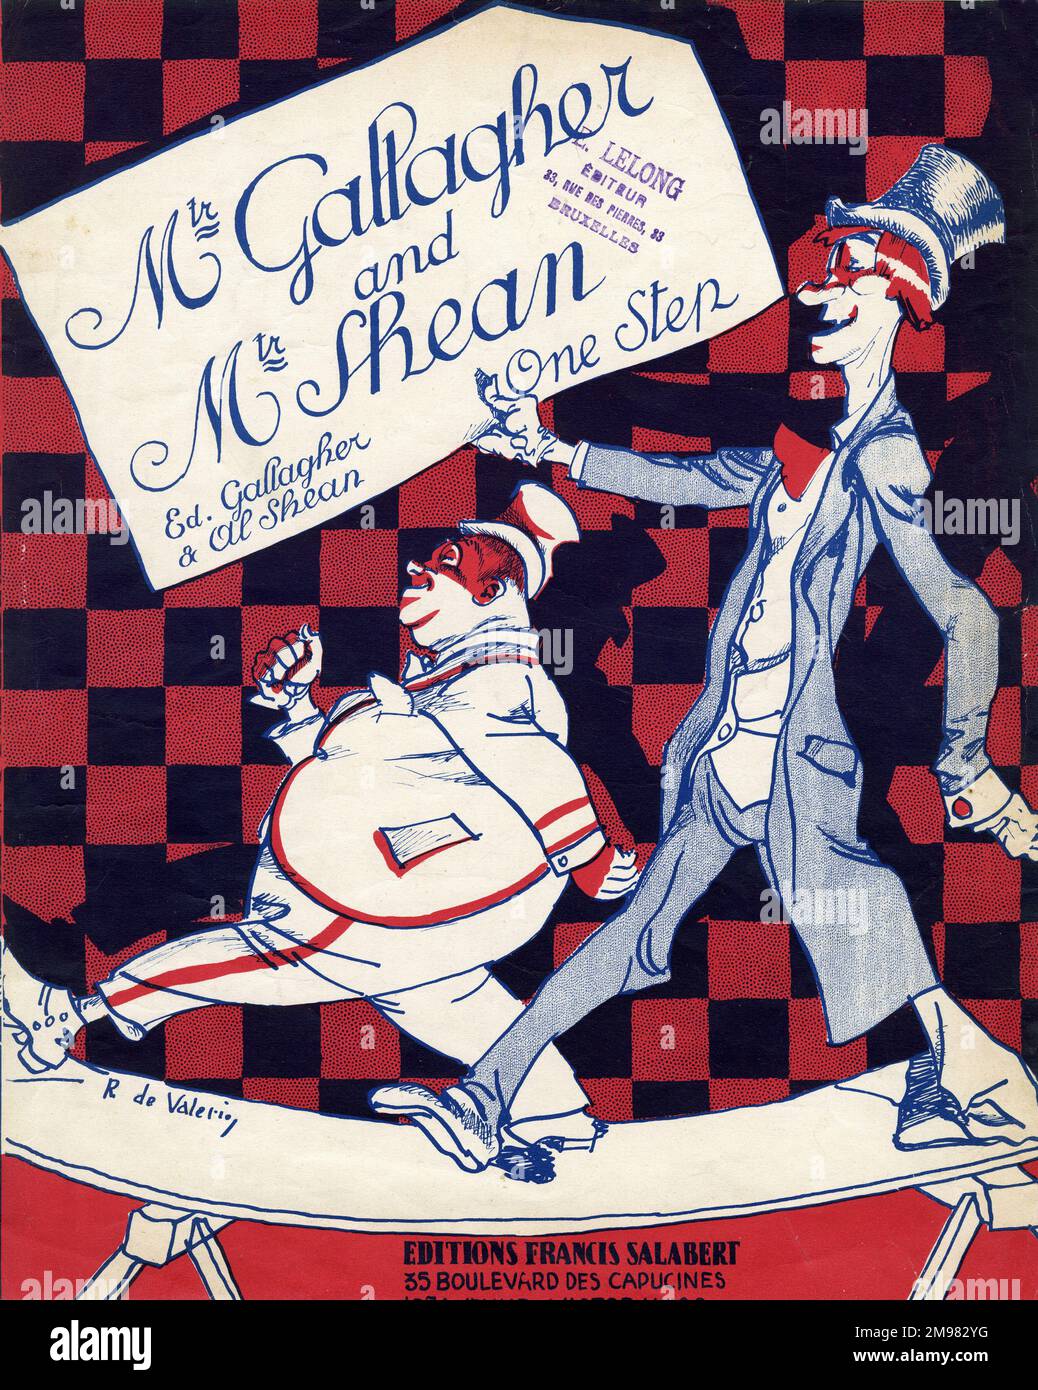 Music cover, Mr Gallagher and Mr Shean One Step. Stock Photo